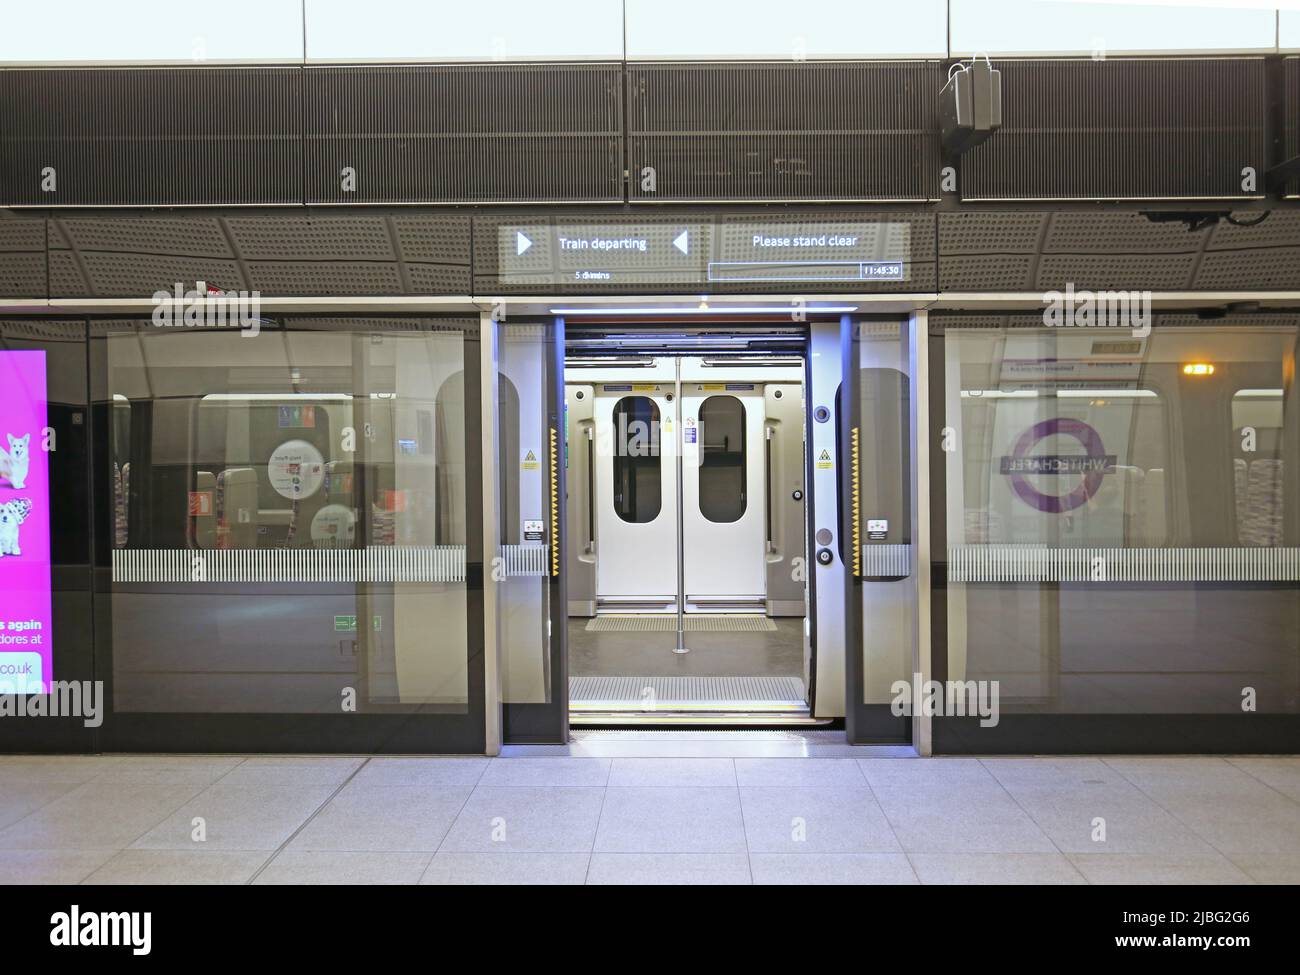 London, UK. A train on the new Elizabeth Line (Crossrail) waits at Whitechapel Station. Train and safety screen doors open, information sign above. Stock Photo